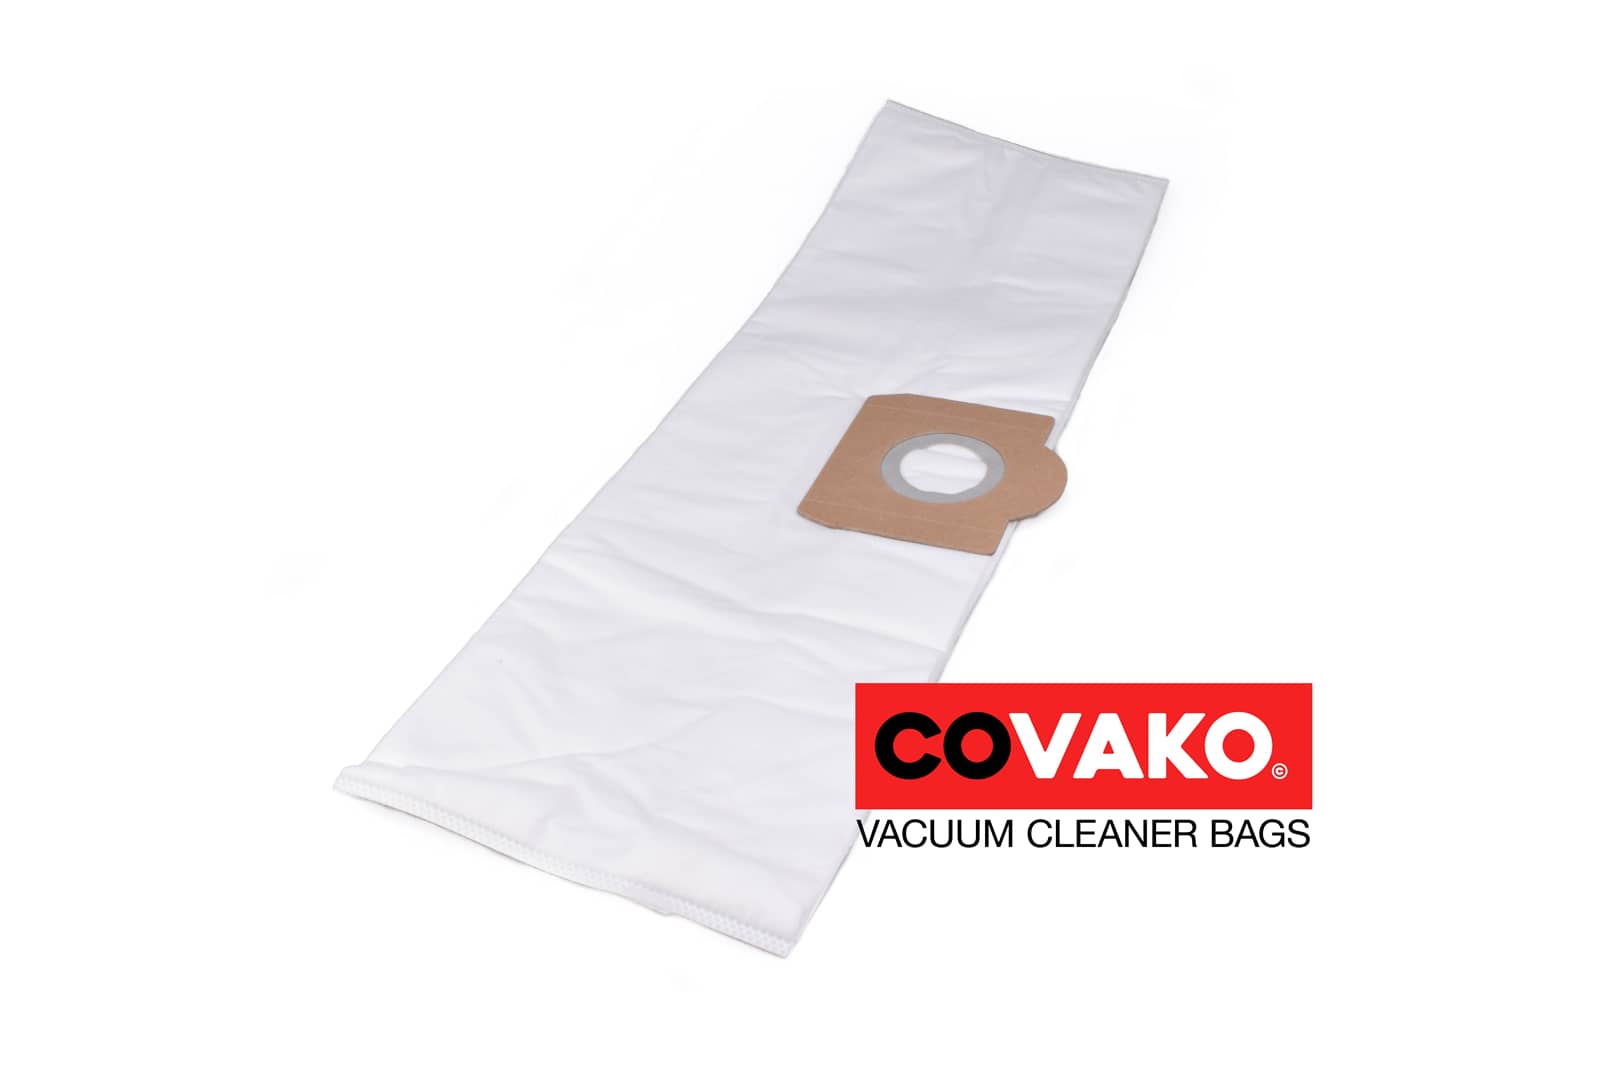 Einhell AS 1400 / Synthesis - Einhell vacuum cleaner bags